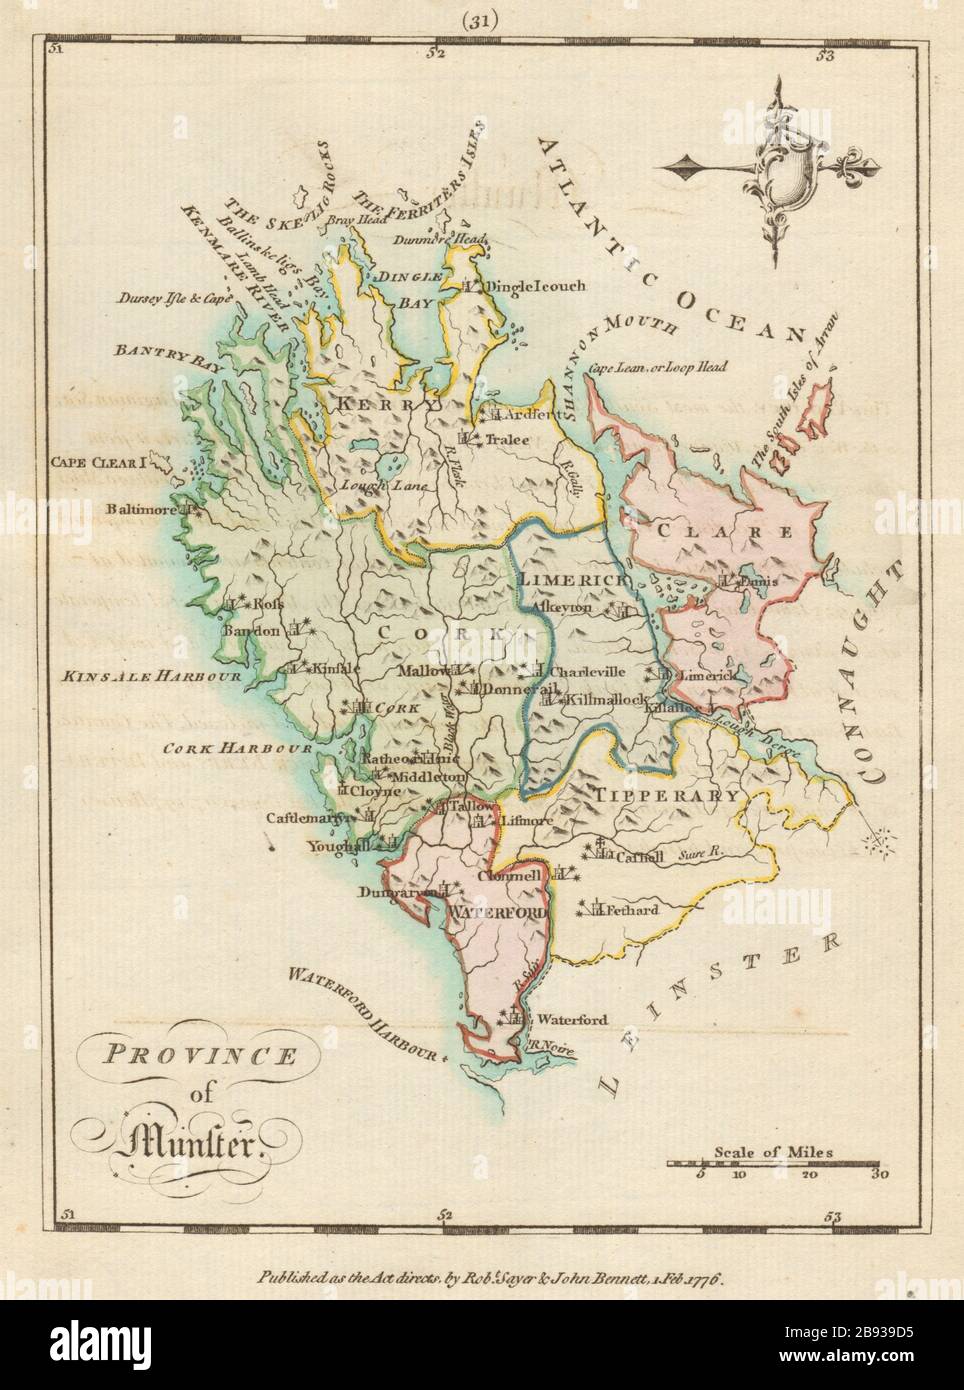 Province of Munster. Antique copperplate map by Scalé / Sayer 1776 old Stock Photo